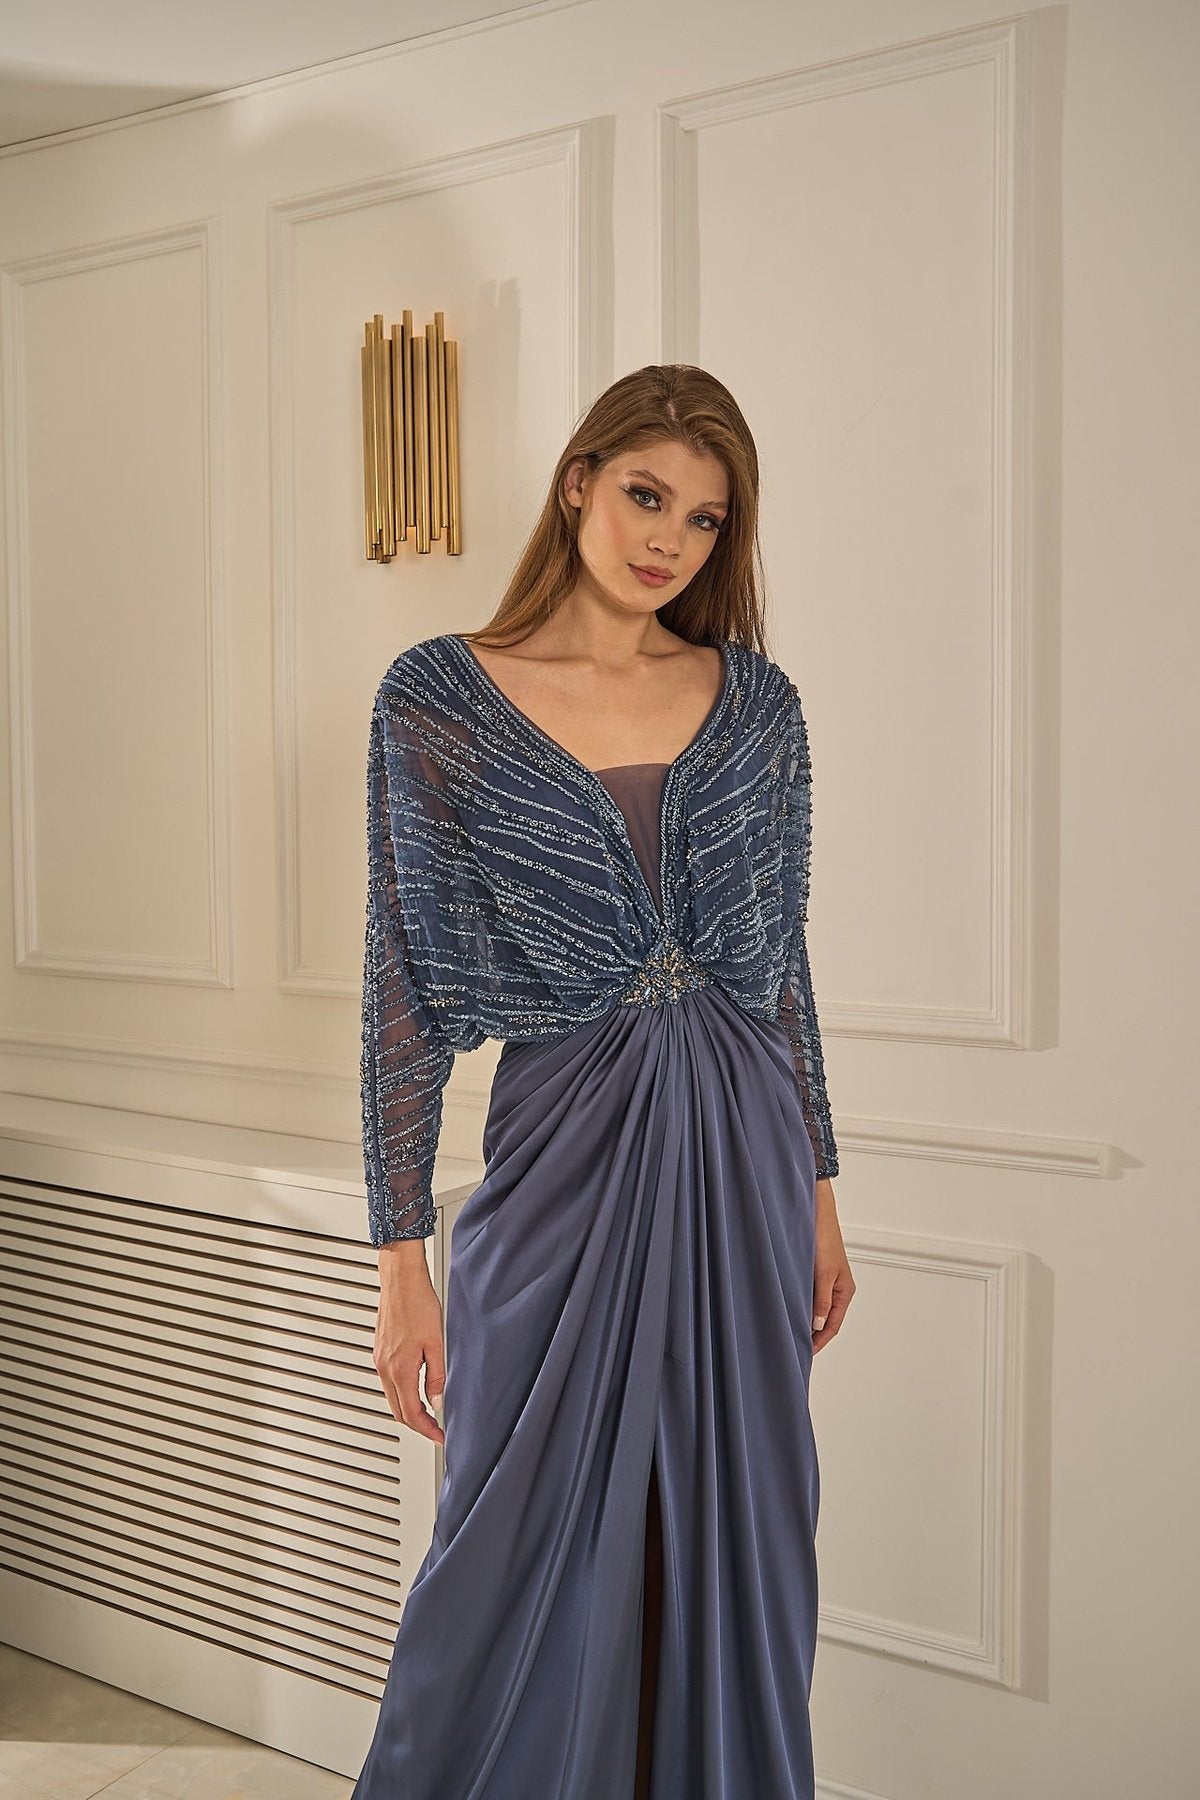  Fern - Long-Sleeved Embroidered Evening Dress with Slit Detail